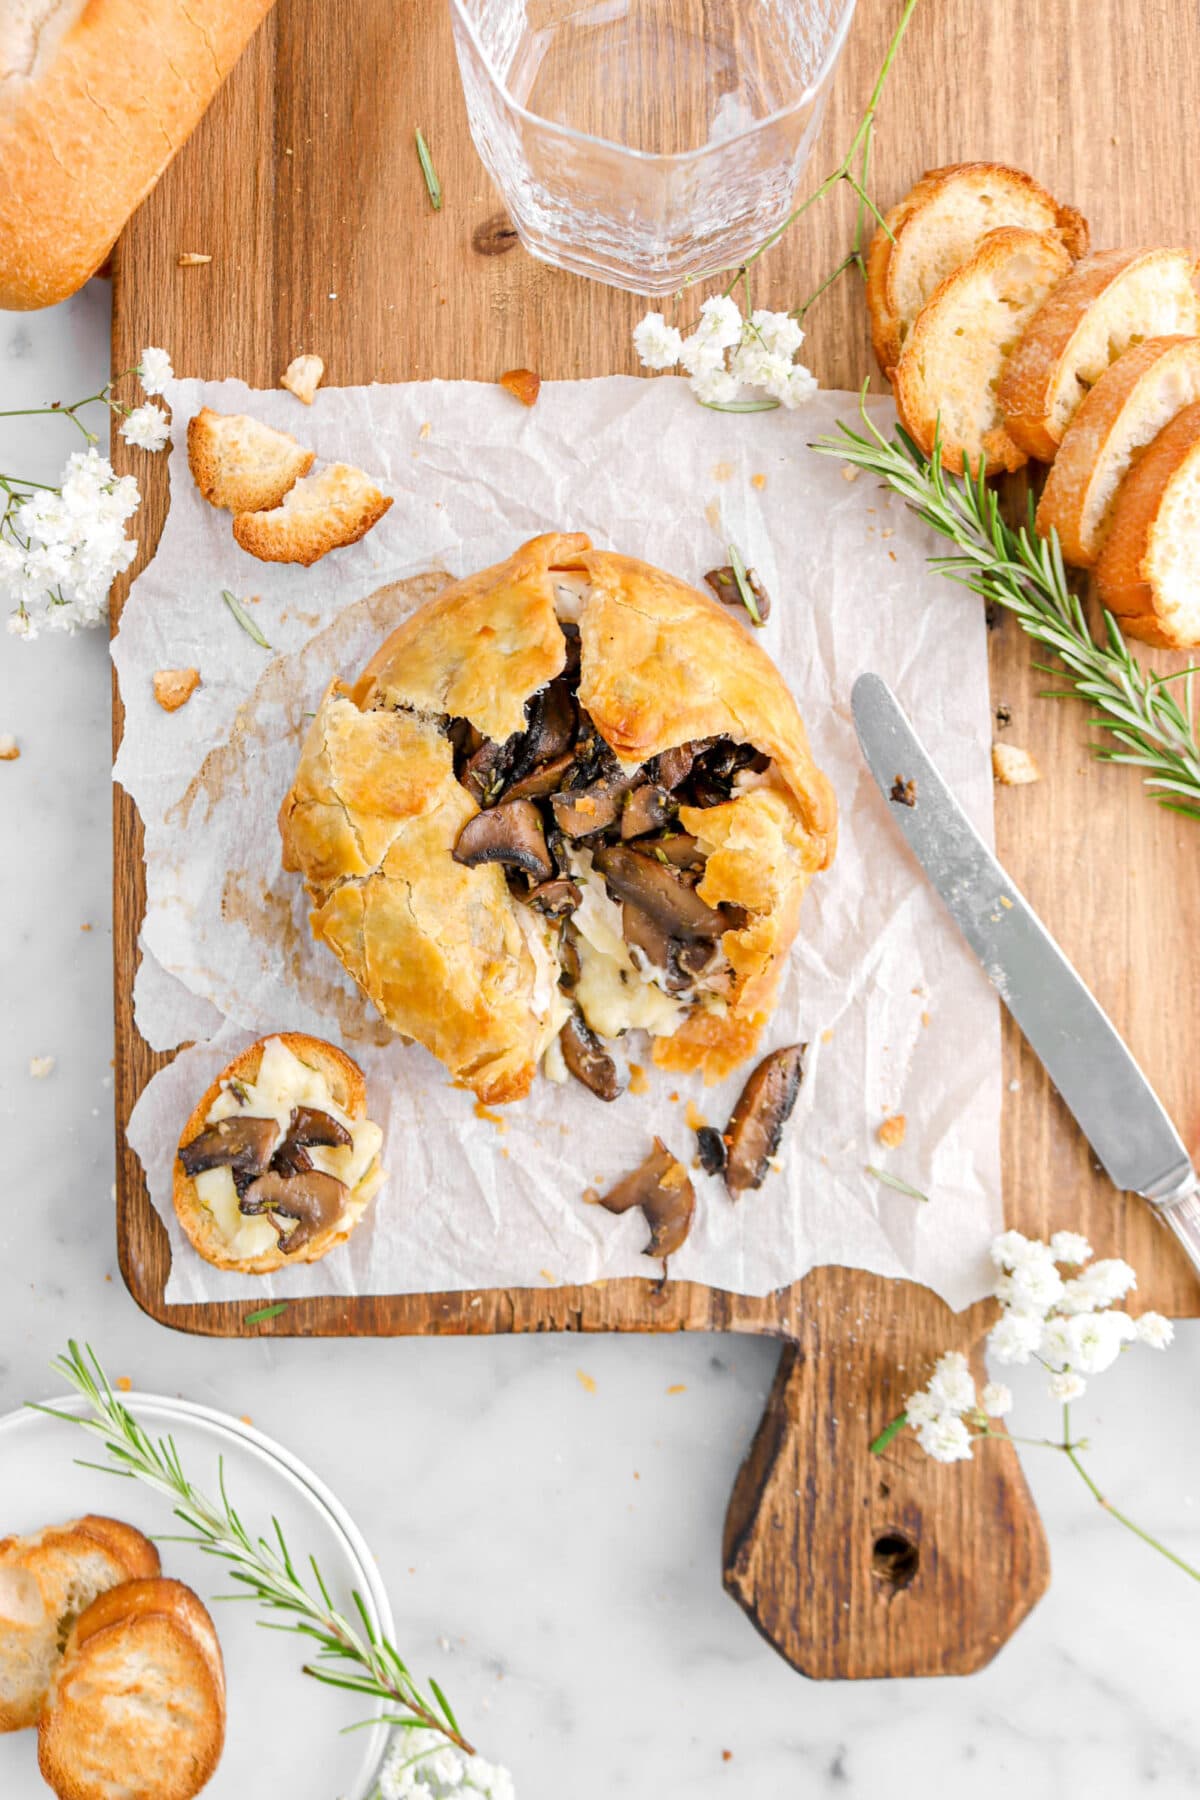 Puff Pastry Wrapped Baked Brie with Mushrooms Rosemary and Garlic